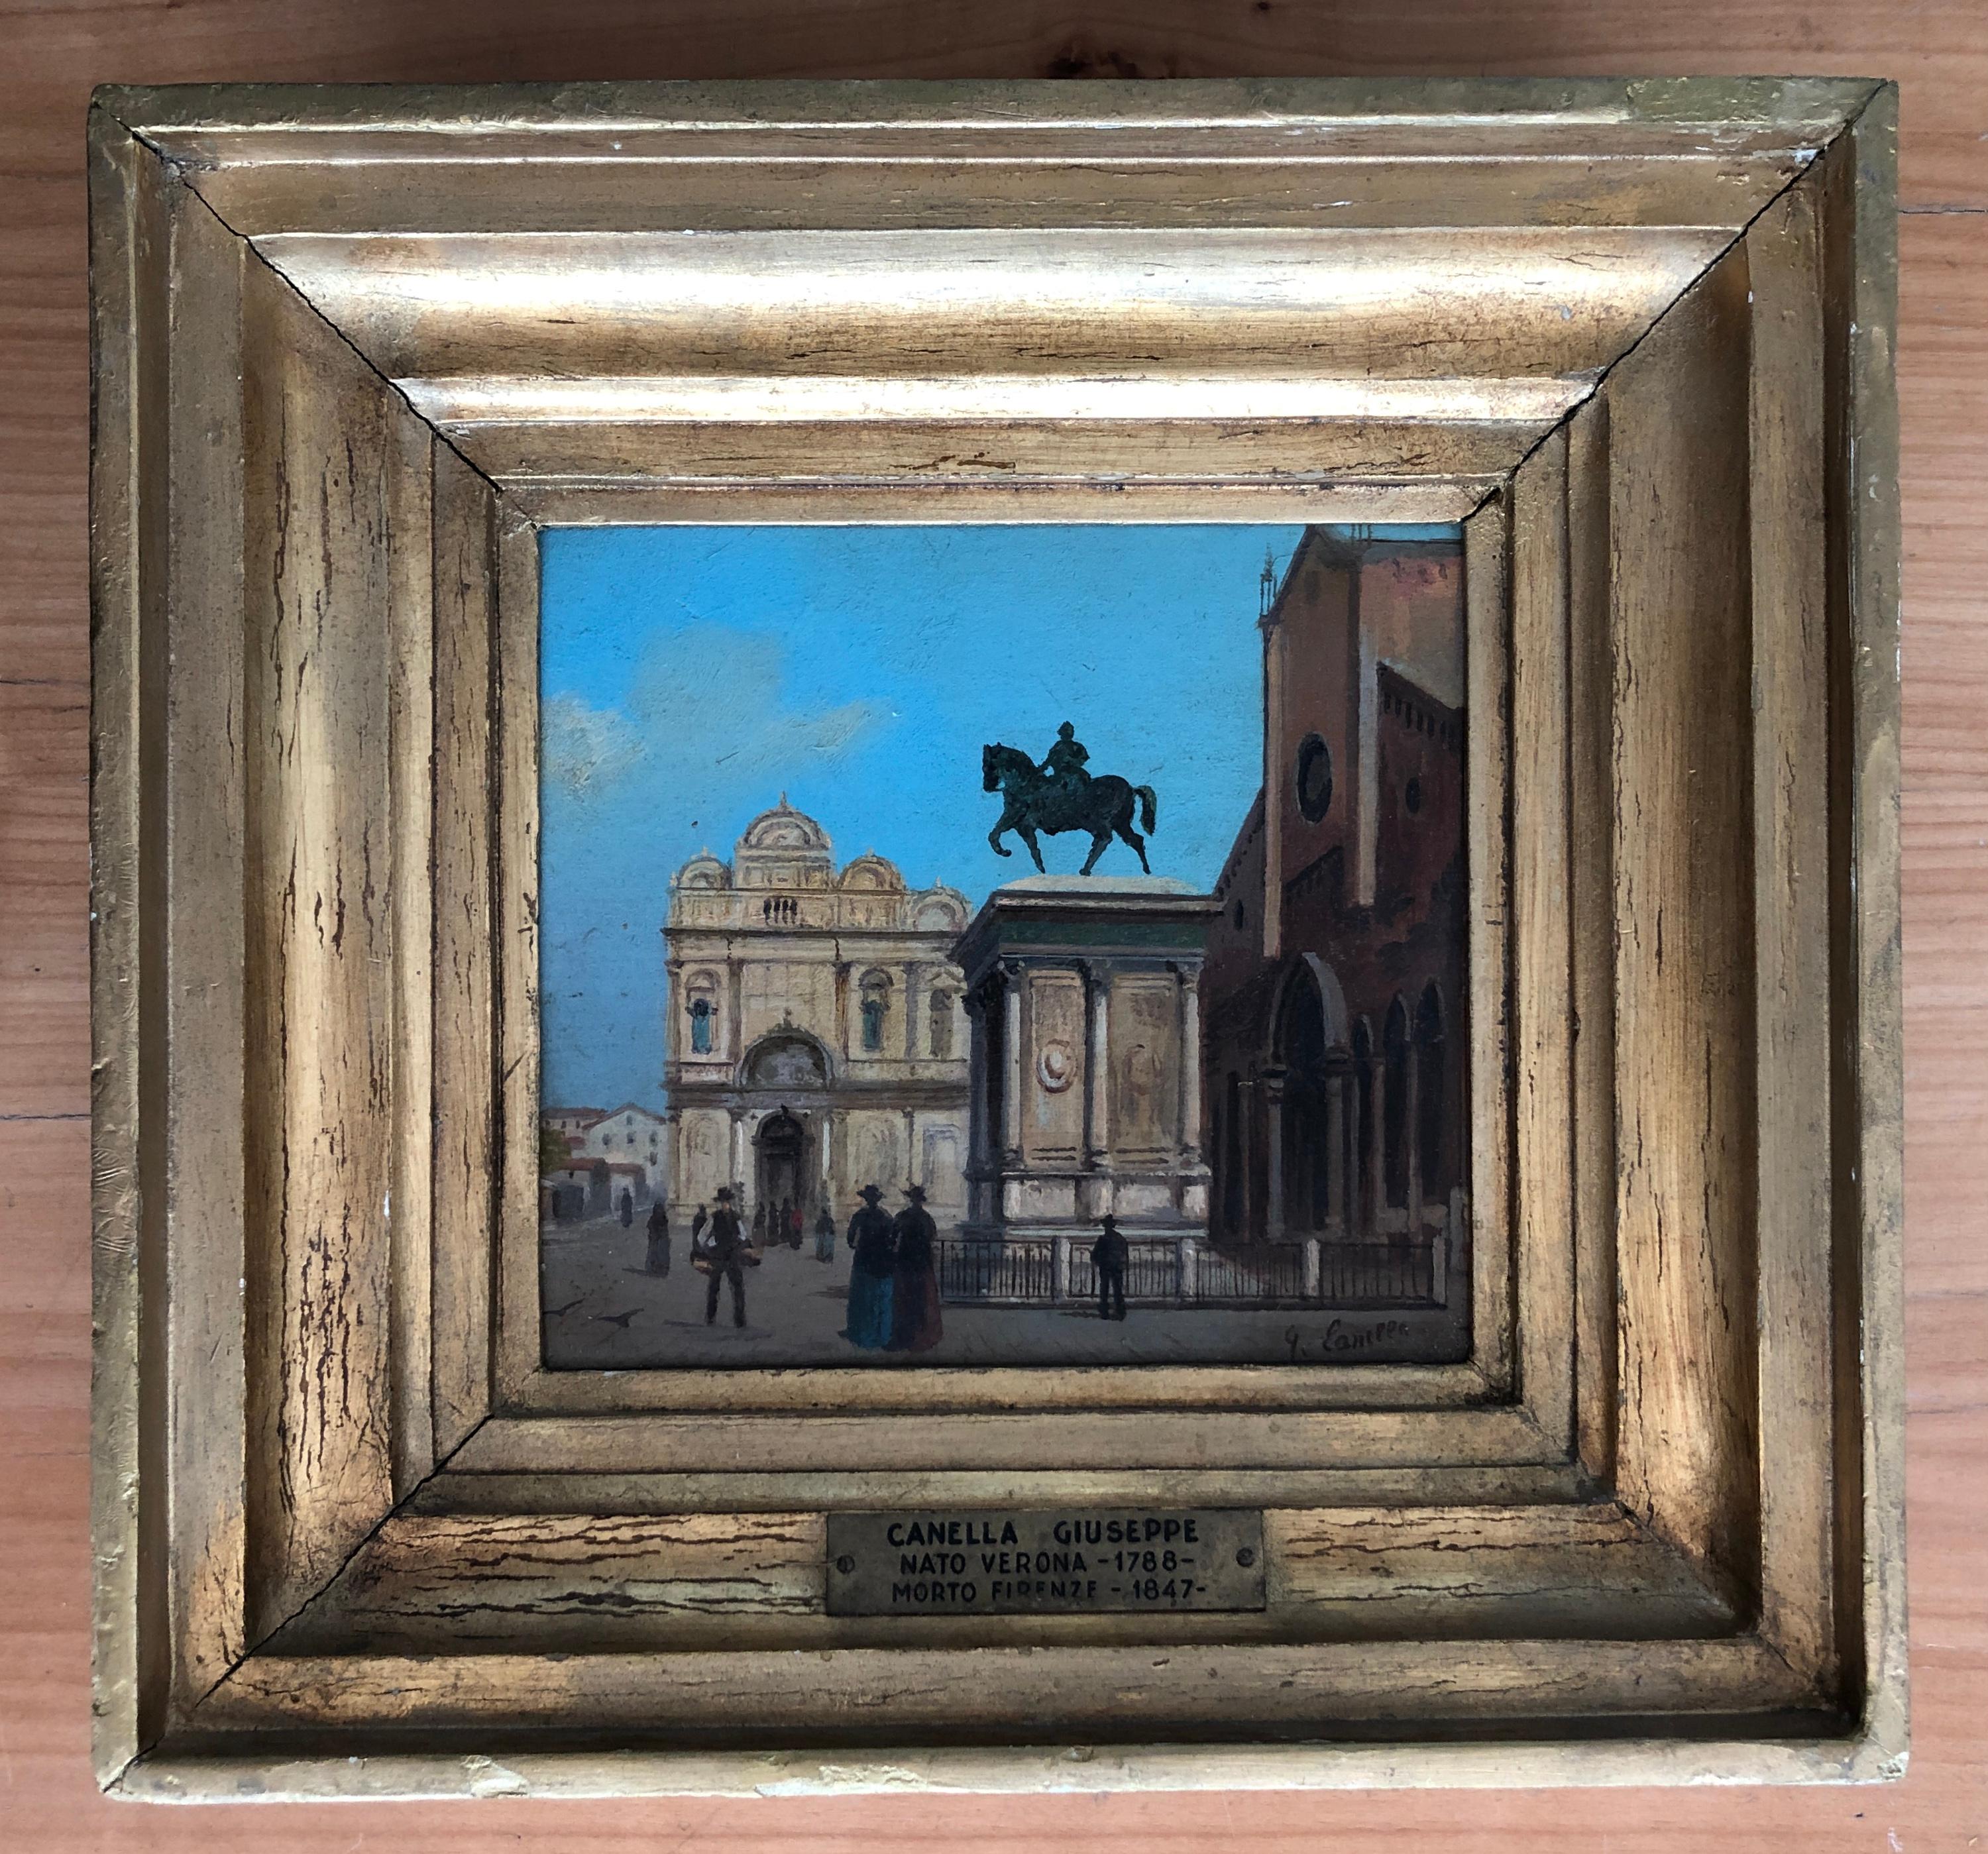 Basilica of SS Giovanni e Paolo with the equestrian statue of Bartolomeo, Venice - Painting by Giuseppe Canella